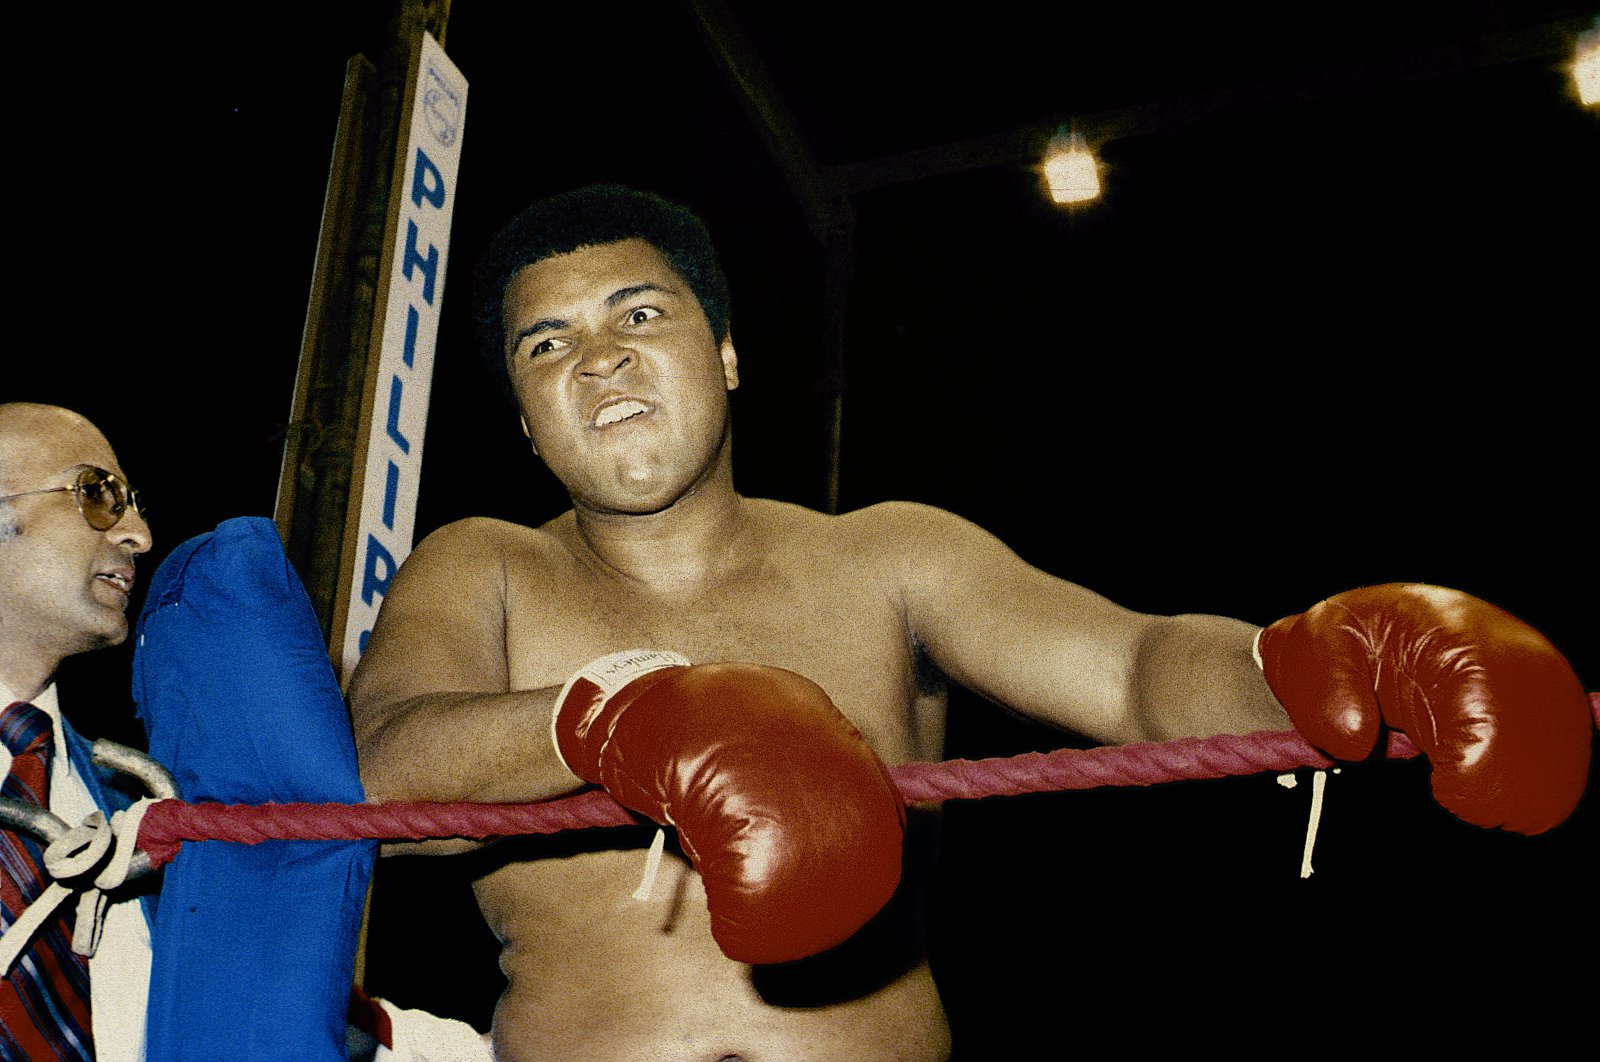 The &quot;Thrilla in Manila&quot; took place in 1975 in the Philippines and lasted for 14 rounds. (Shutterstock Photo)